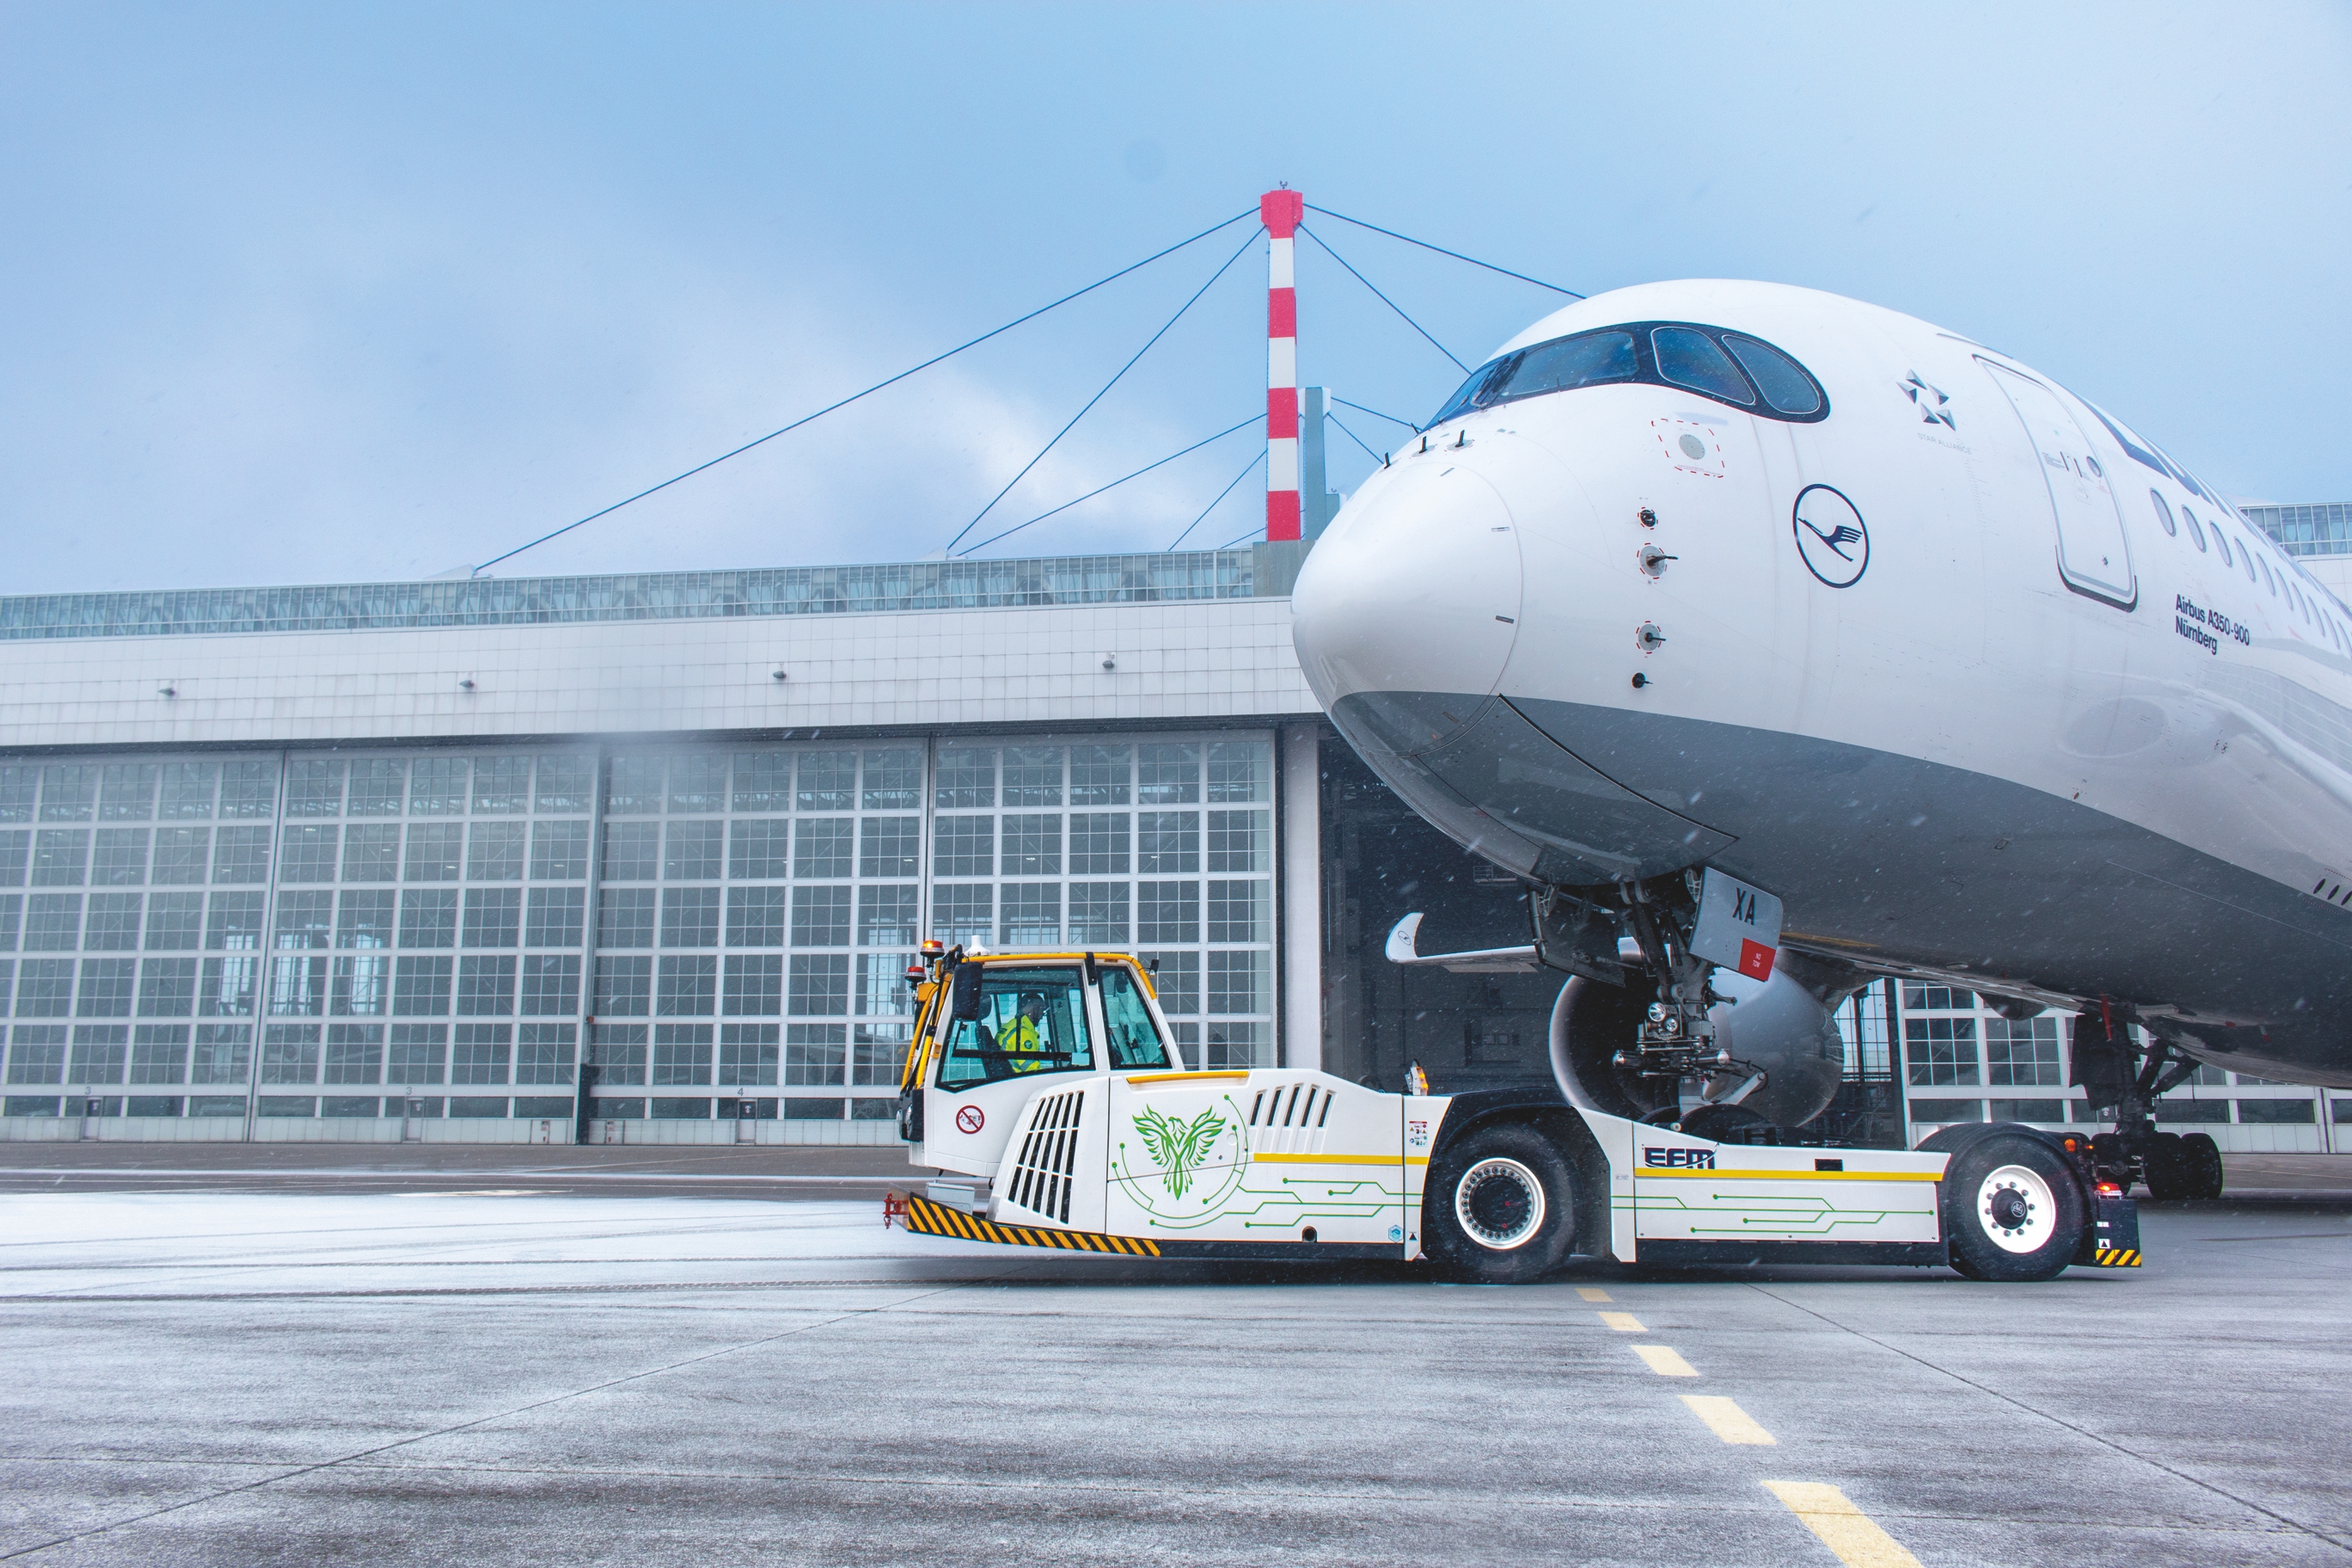 Pushback with the electrified aircraft tractor - equipped with AKASOL battery systems